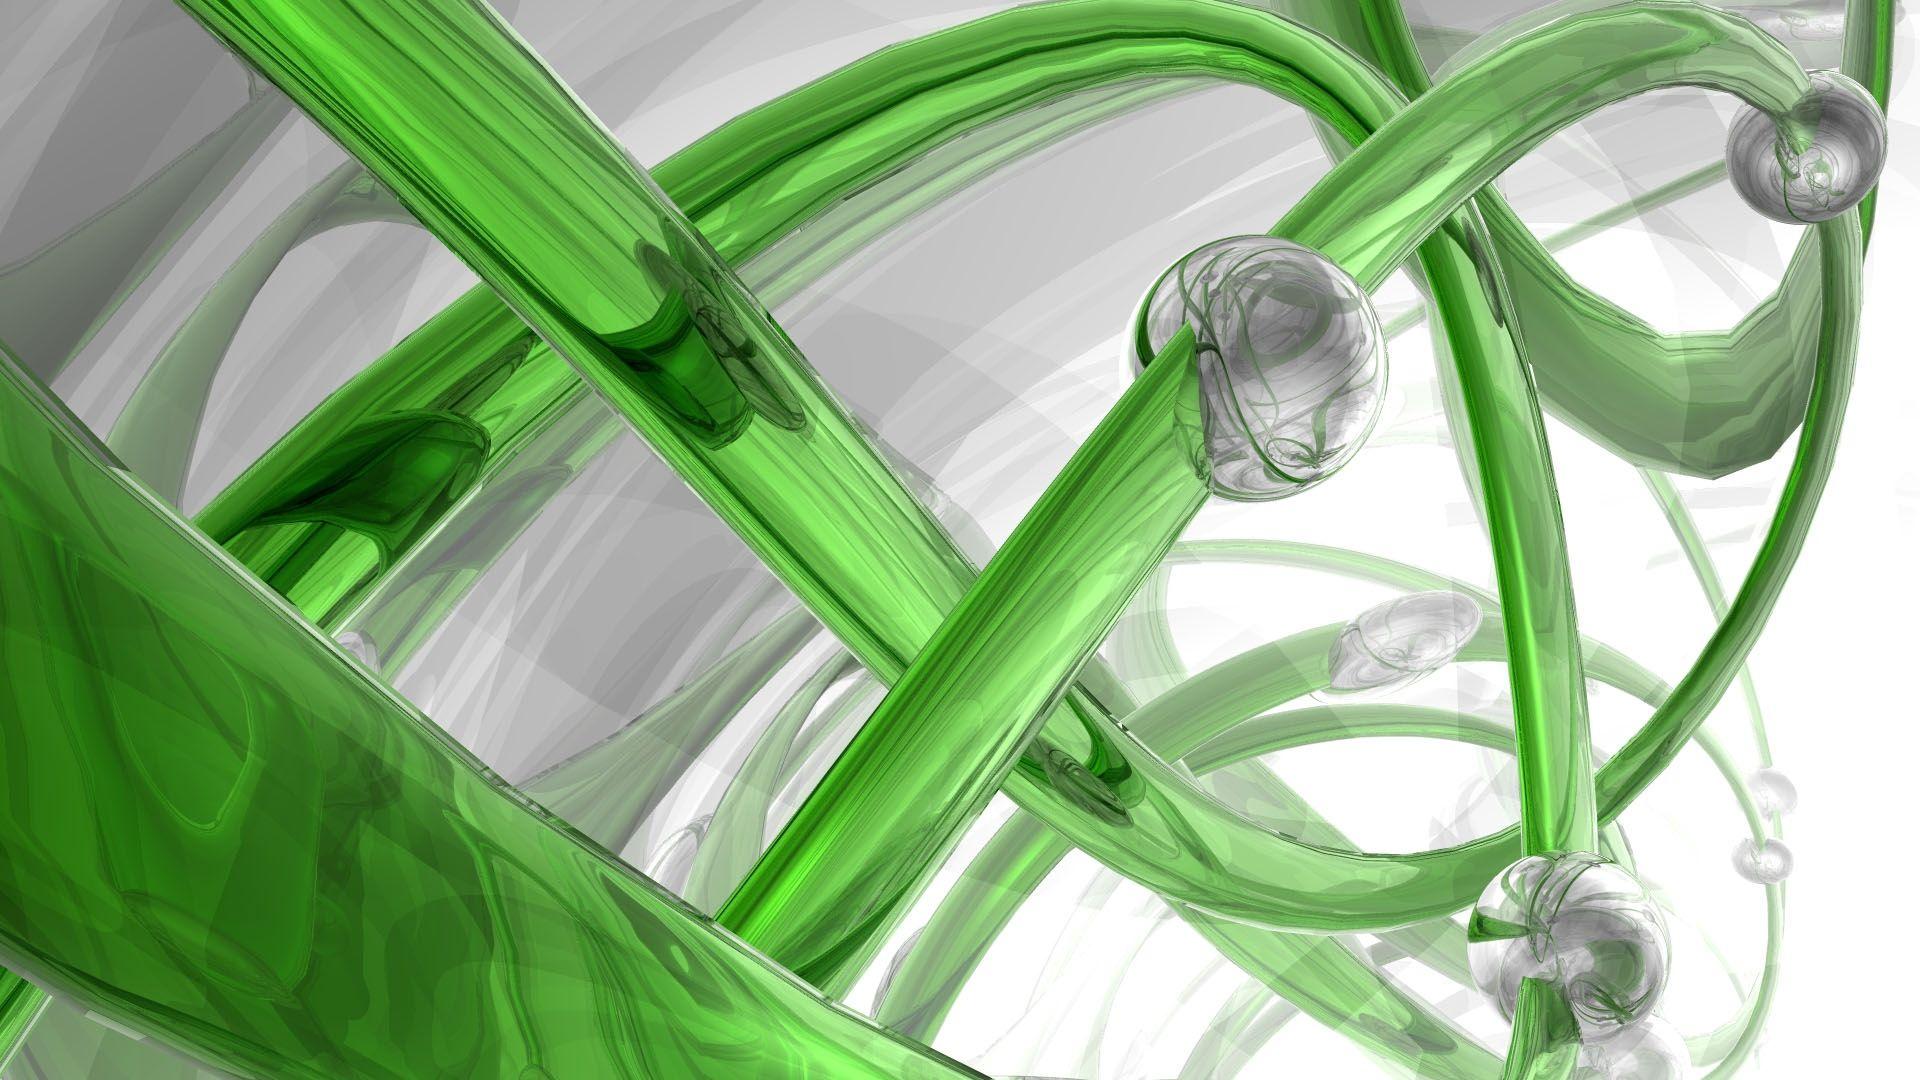 Green and White Spiral Logo - Download wallpaper 1920x1080 3d, spiral, glass, green, white full hd ...